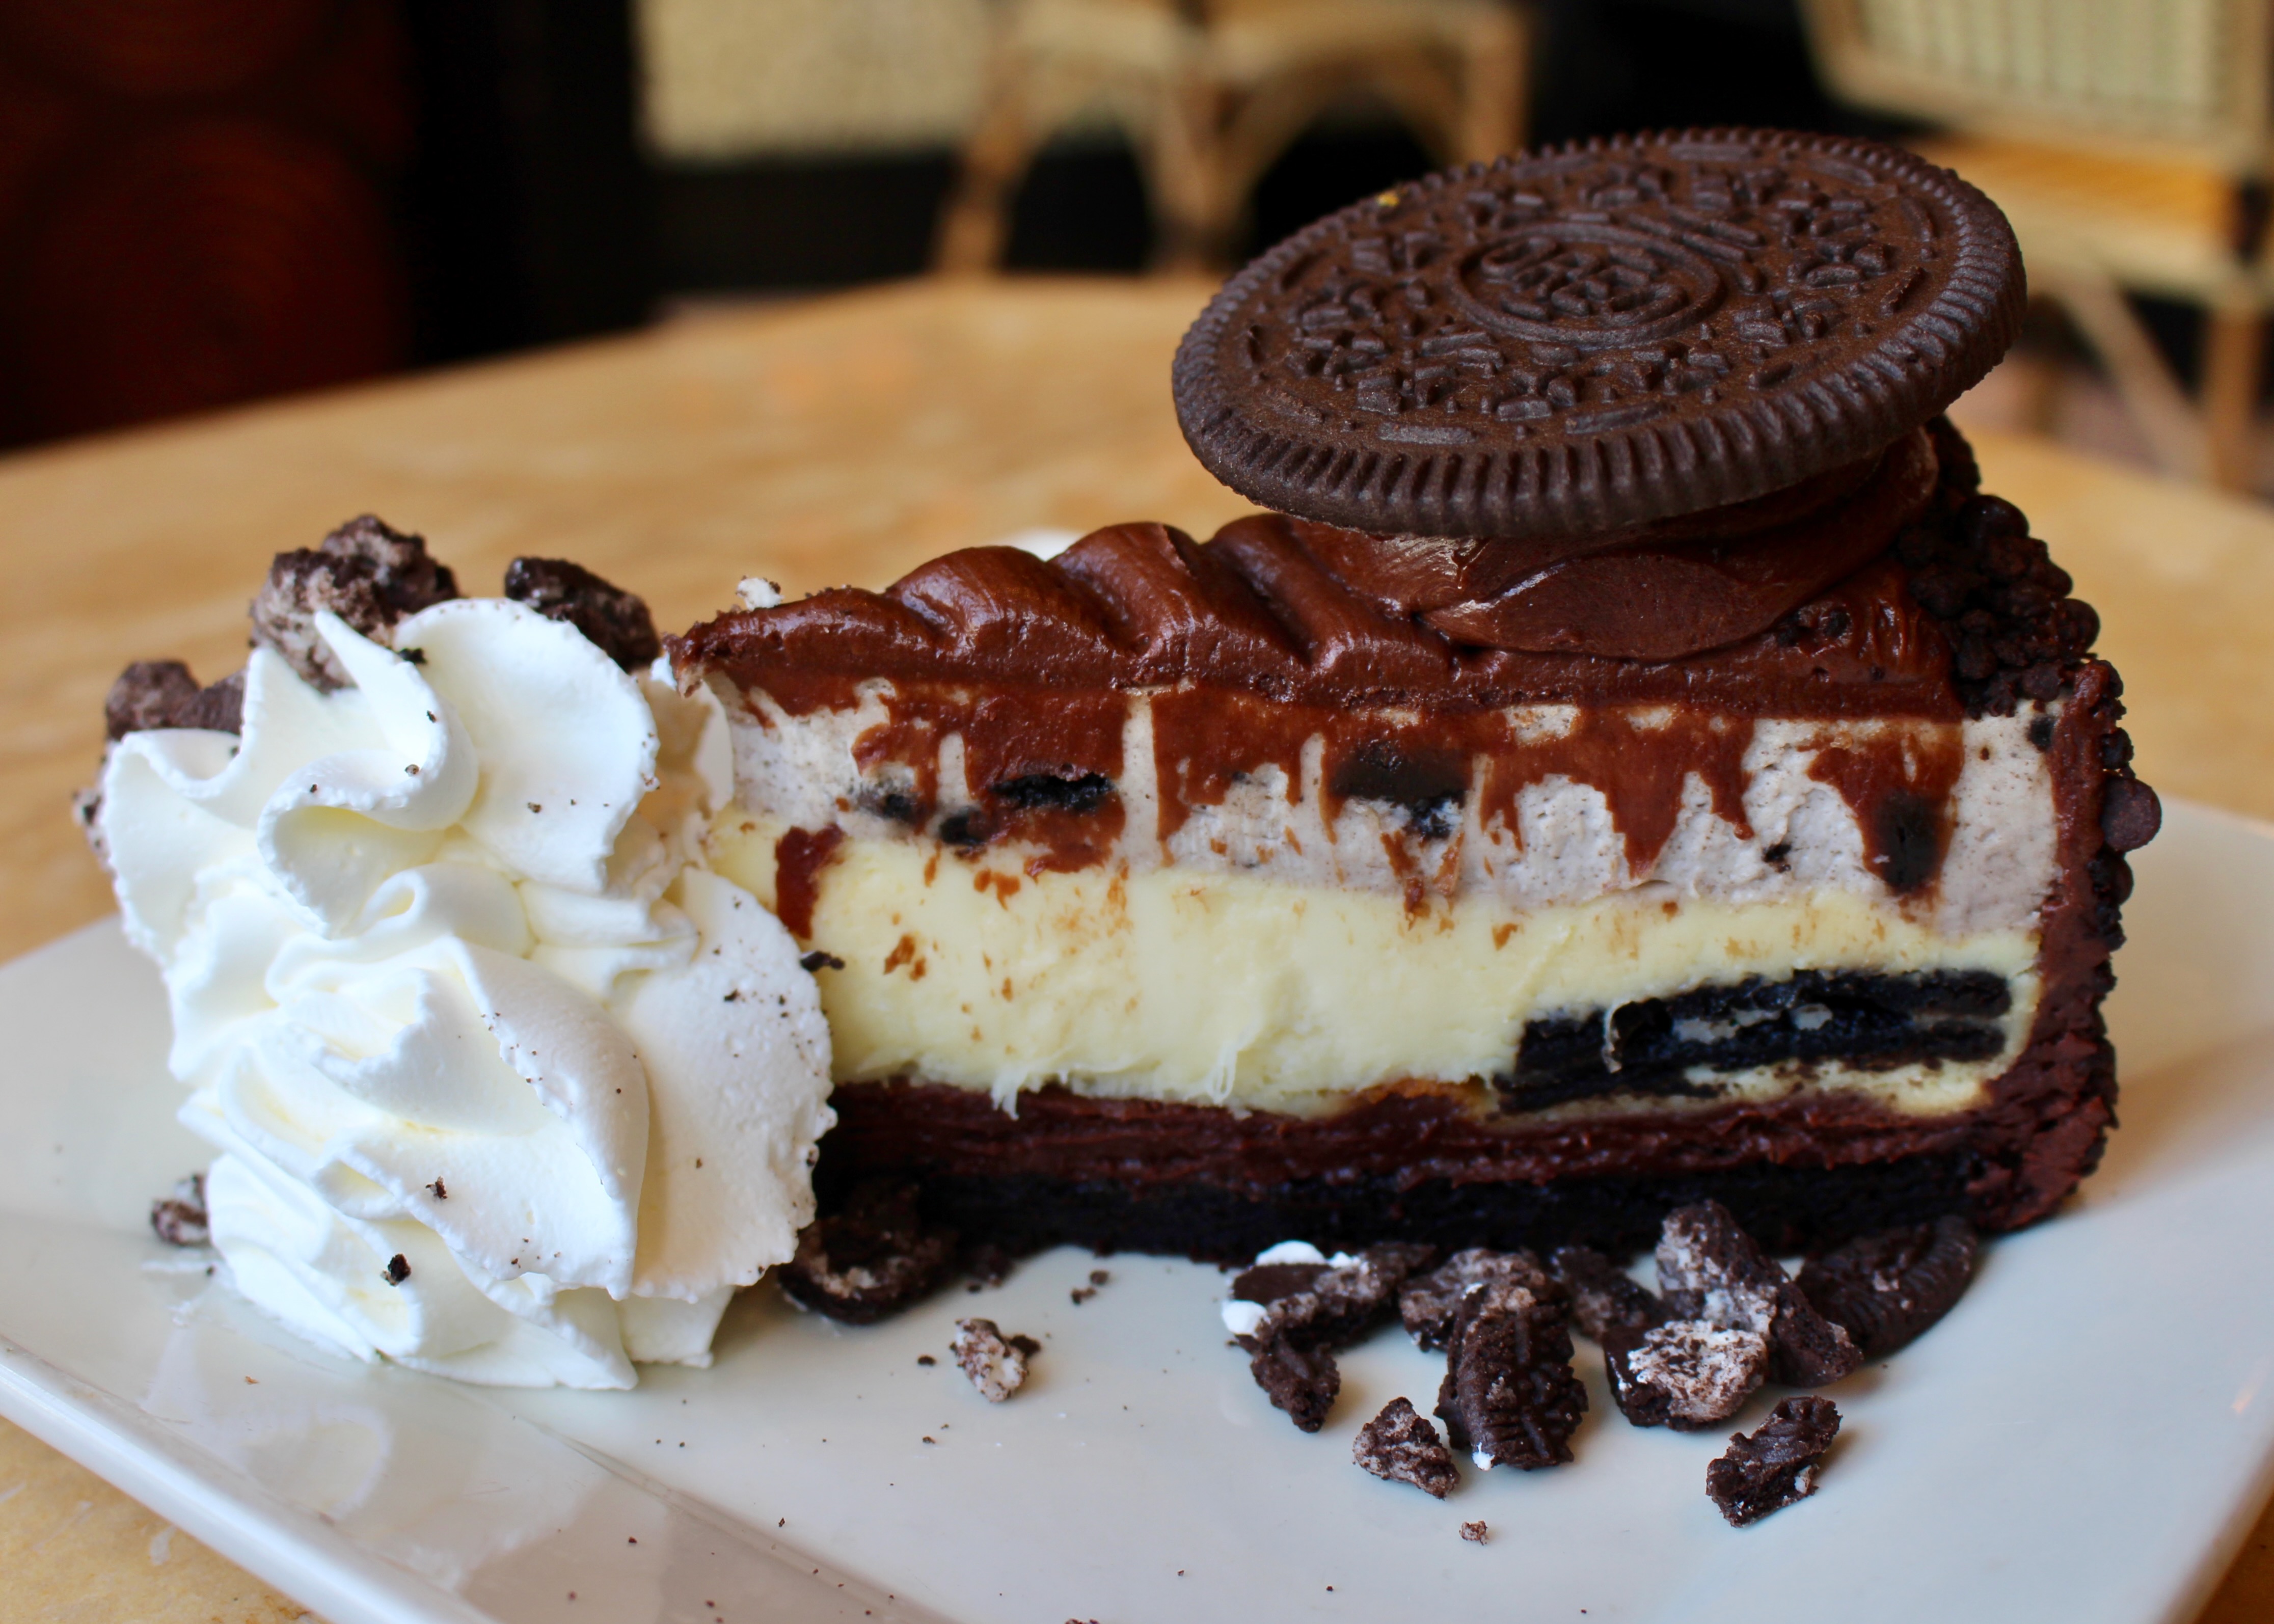 A slice of Oreo cheesecake from Cheesecake Factory in San Francisco